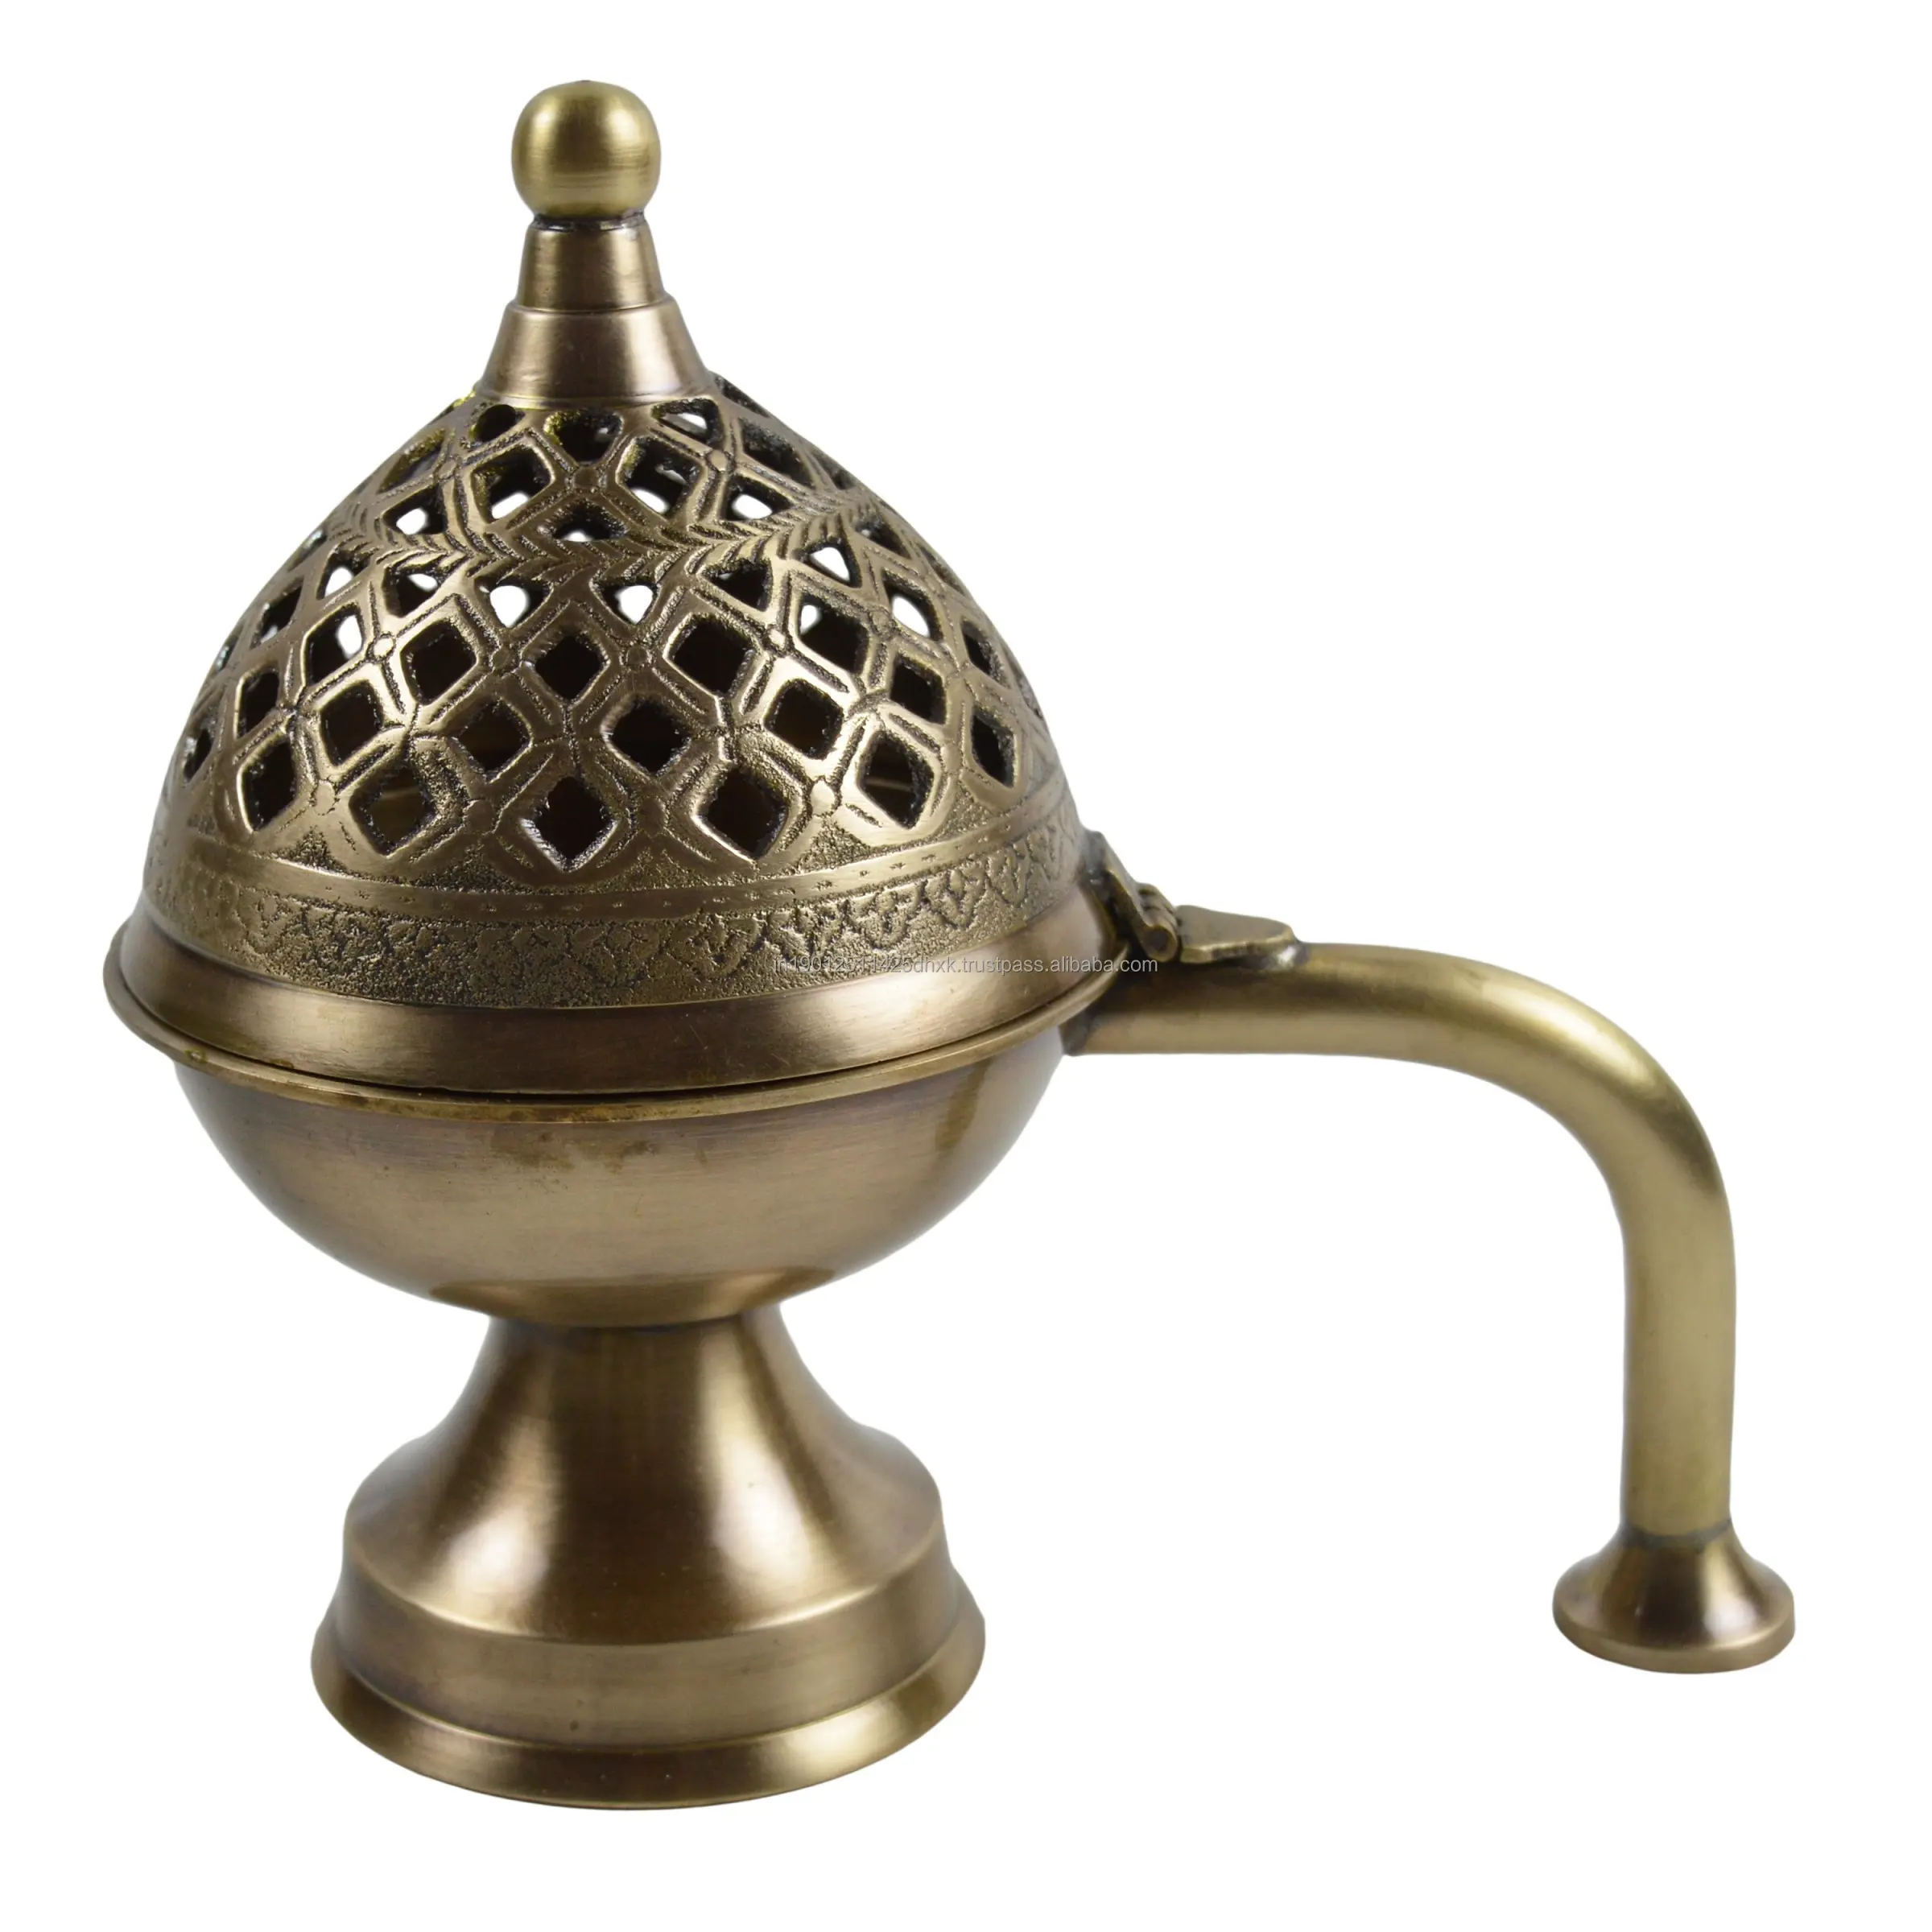 INDIA Golden Brass Incense Stick Holder for Pure Home office and Temple Table Top Product and Buissness Gifting